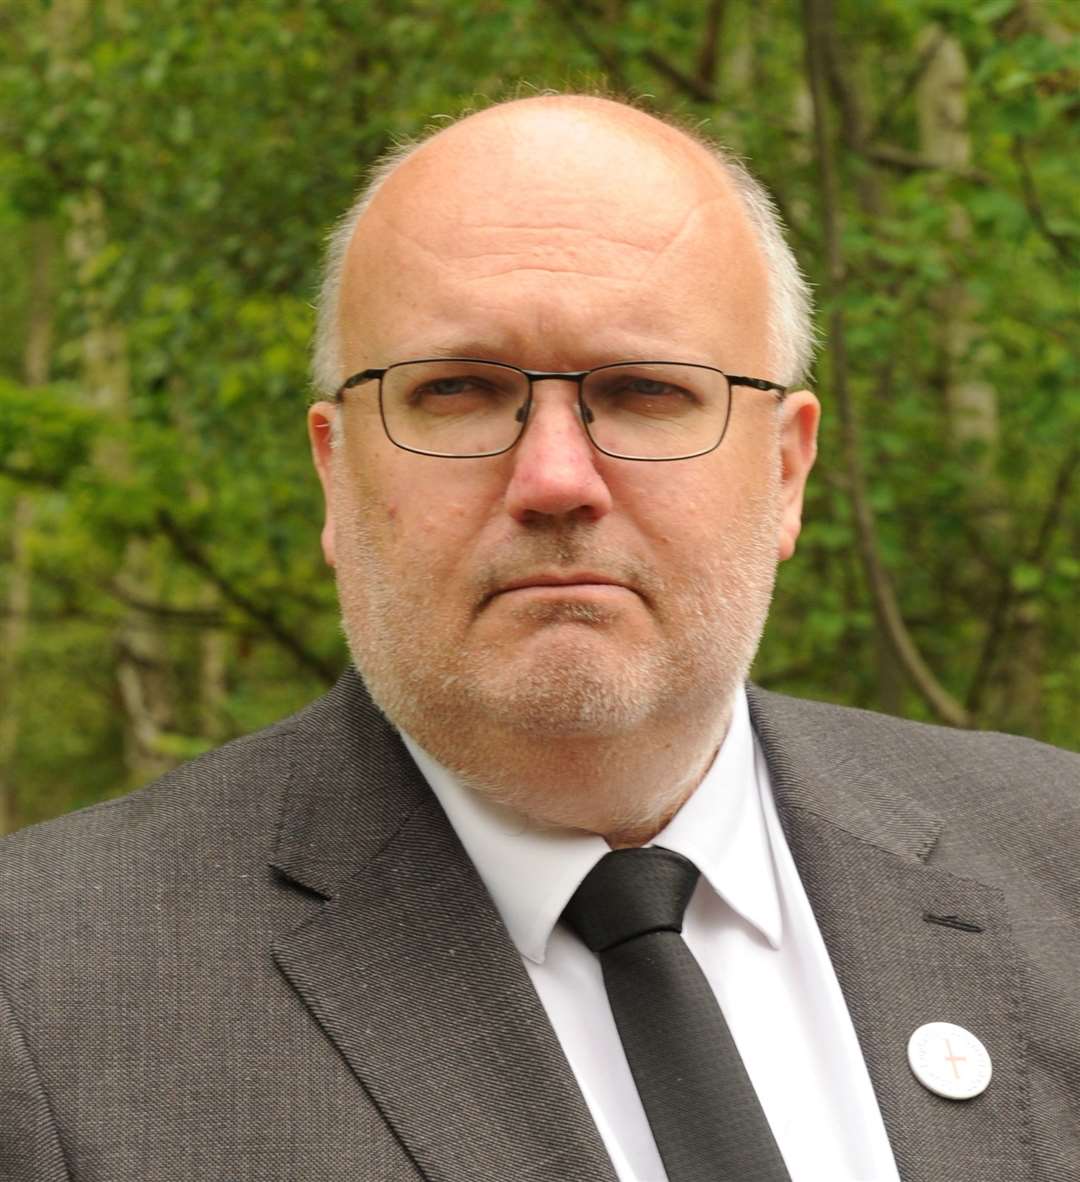 Dartford council leader Jeremy Kite says the use of the cameras was another tool in its "armoury" to tackle flytipping offender. Picture: Steve Crispe